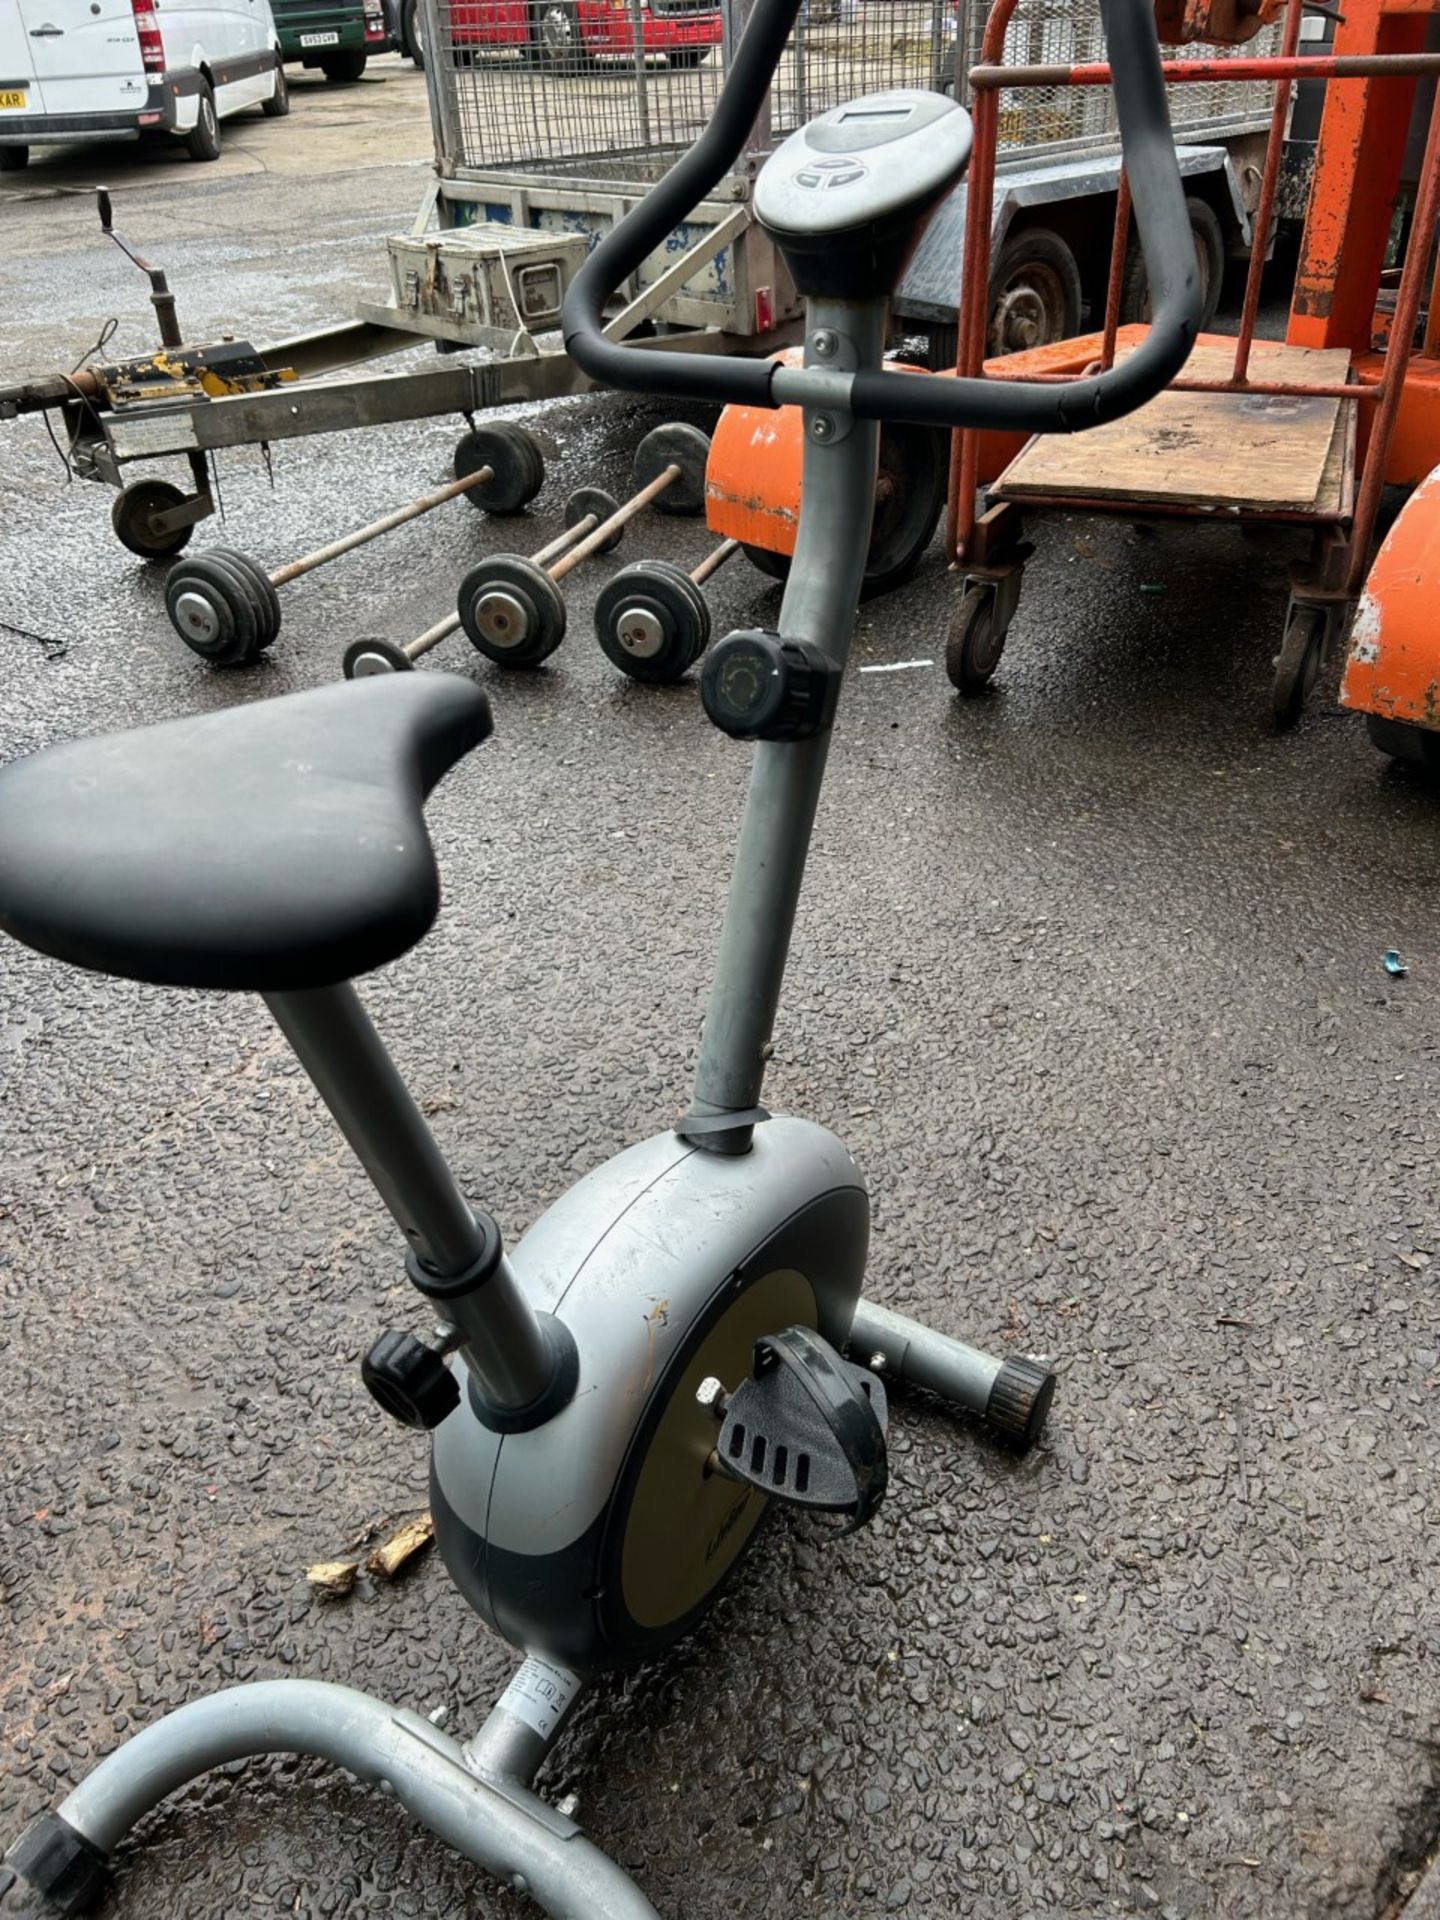 Small lifegear exercise bike. Good for house or garage. Used and average condition. Needs new - Bild 4 aus 4